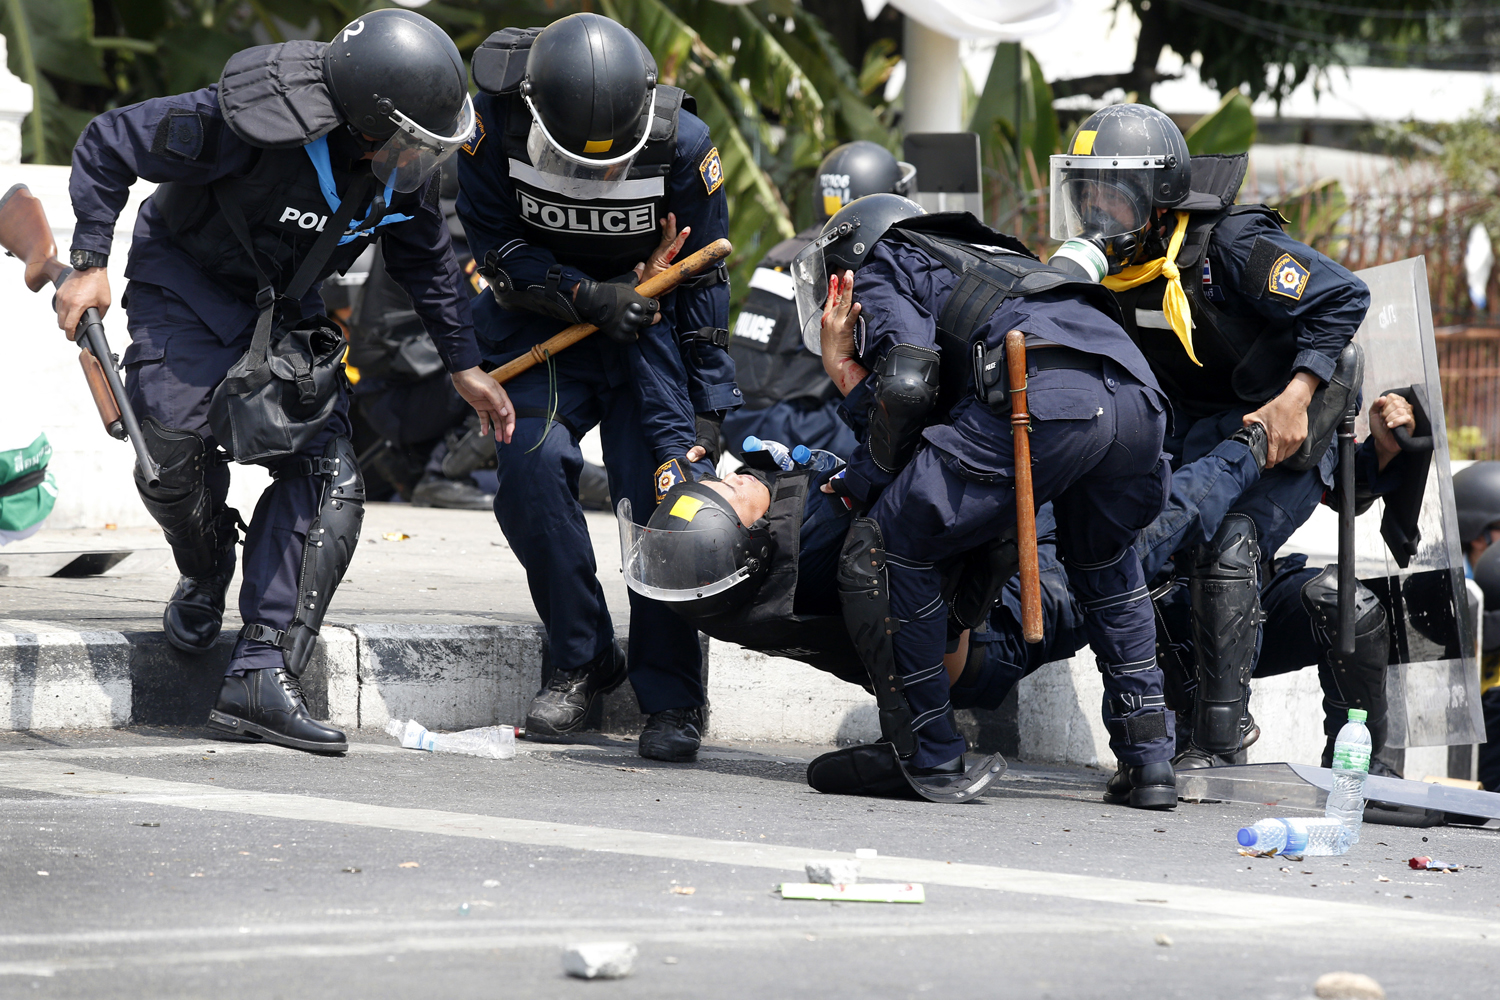 Thai police officers assist a colleague after an explosion during clashes with anti-government protesters near Government House in Bangkok